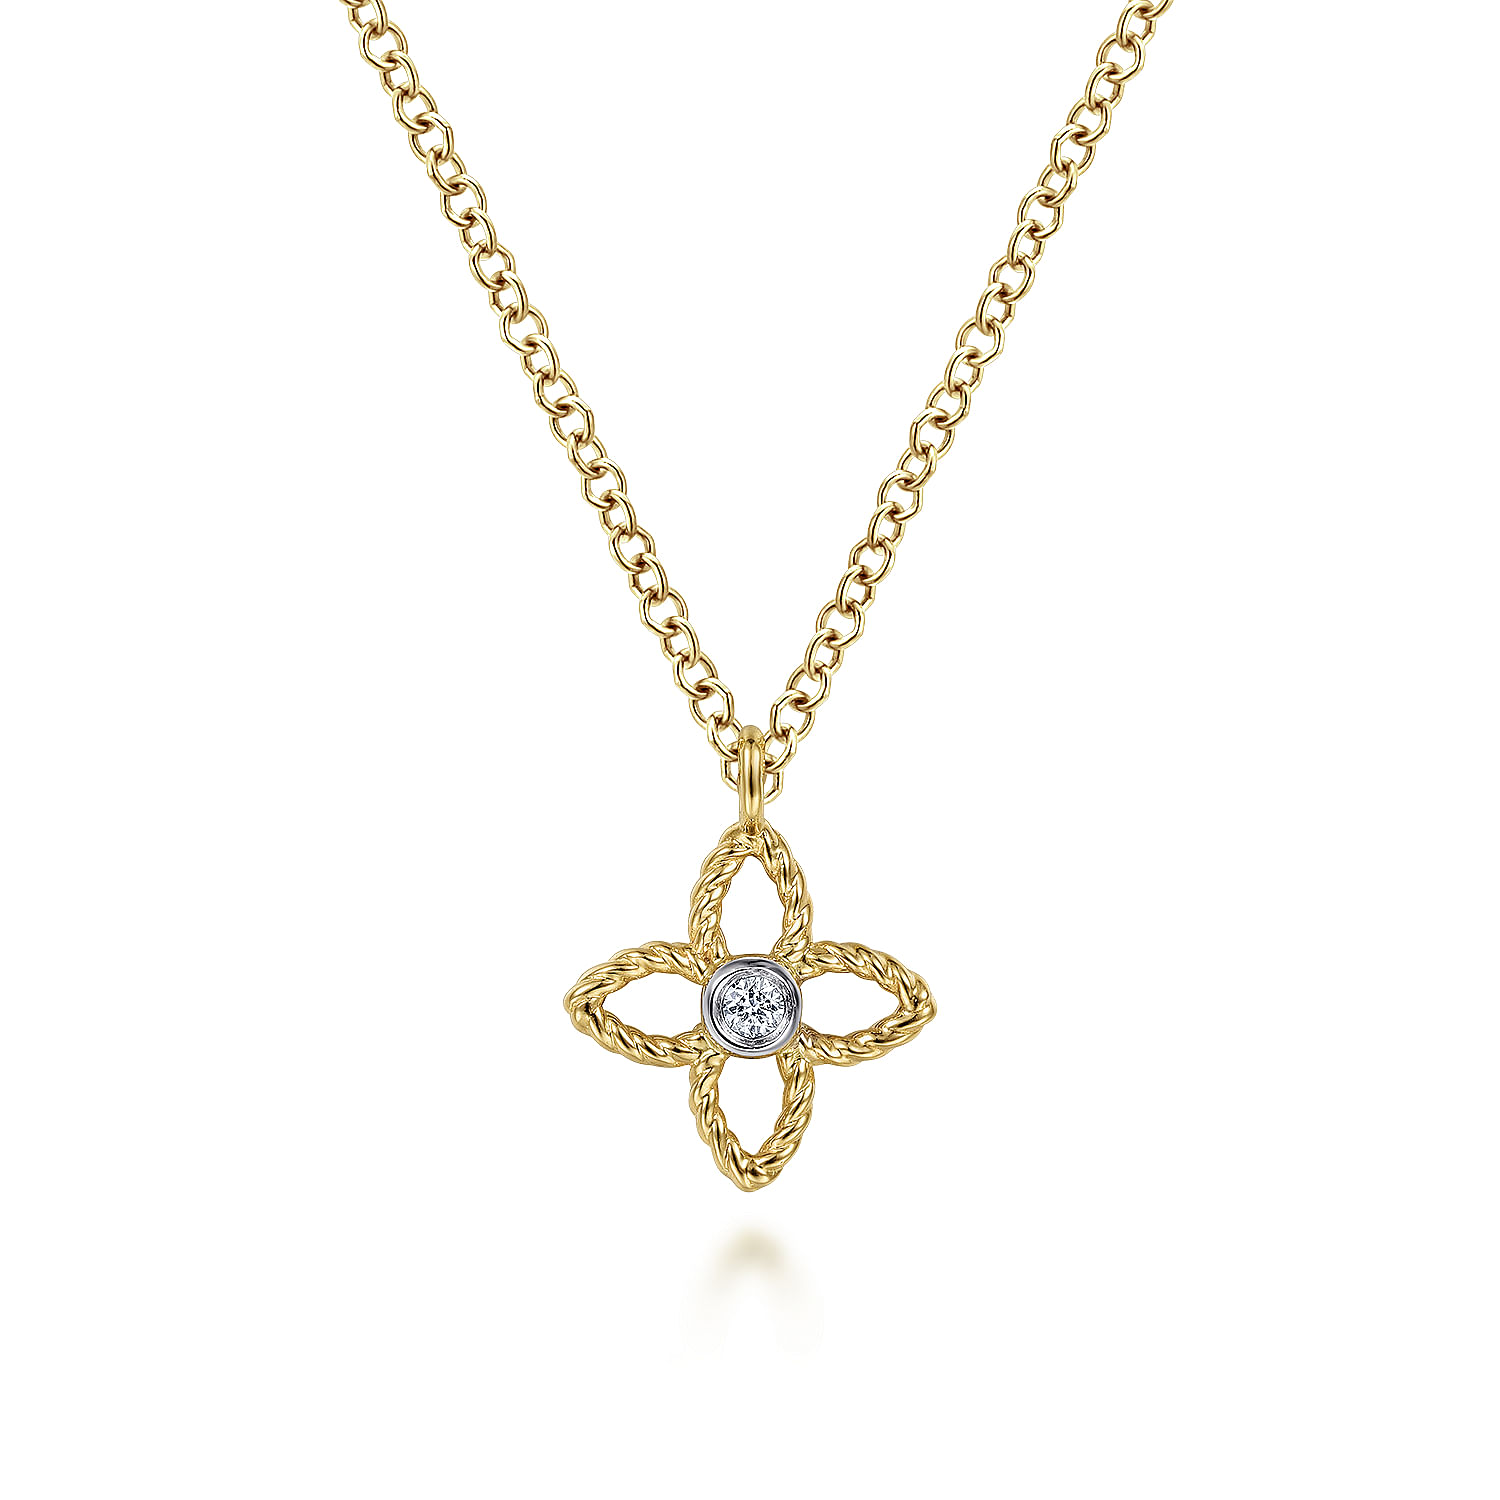 14K Yellow-White Gold Twisted Rope Quatrefoil Pendant Necklace with Diamond Center